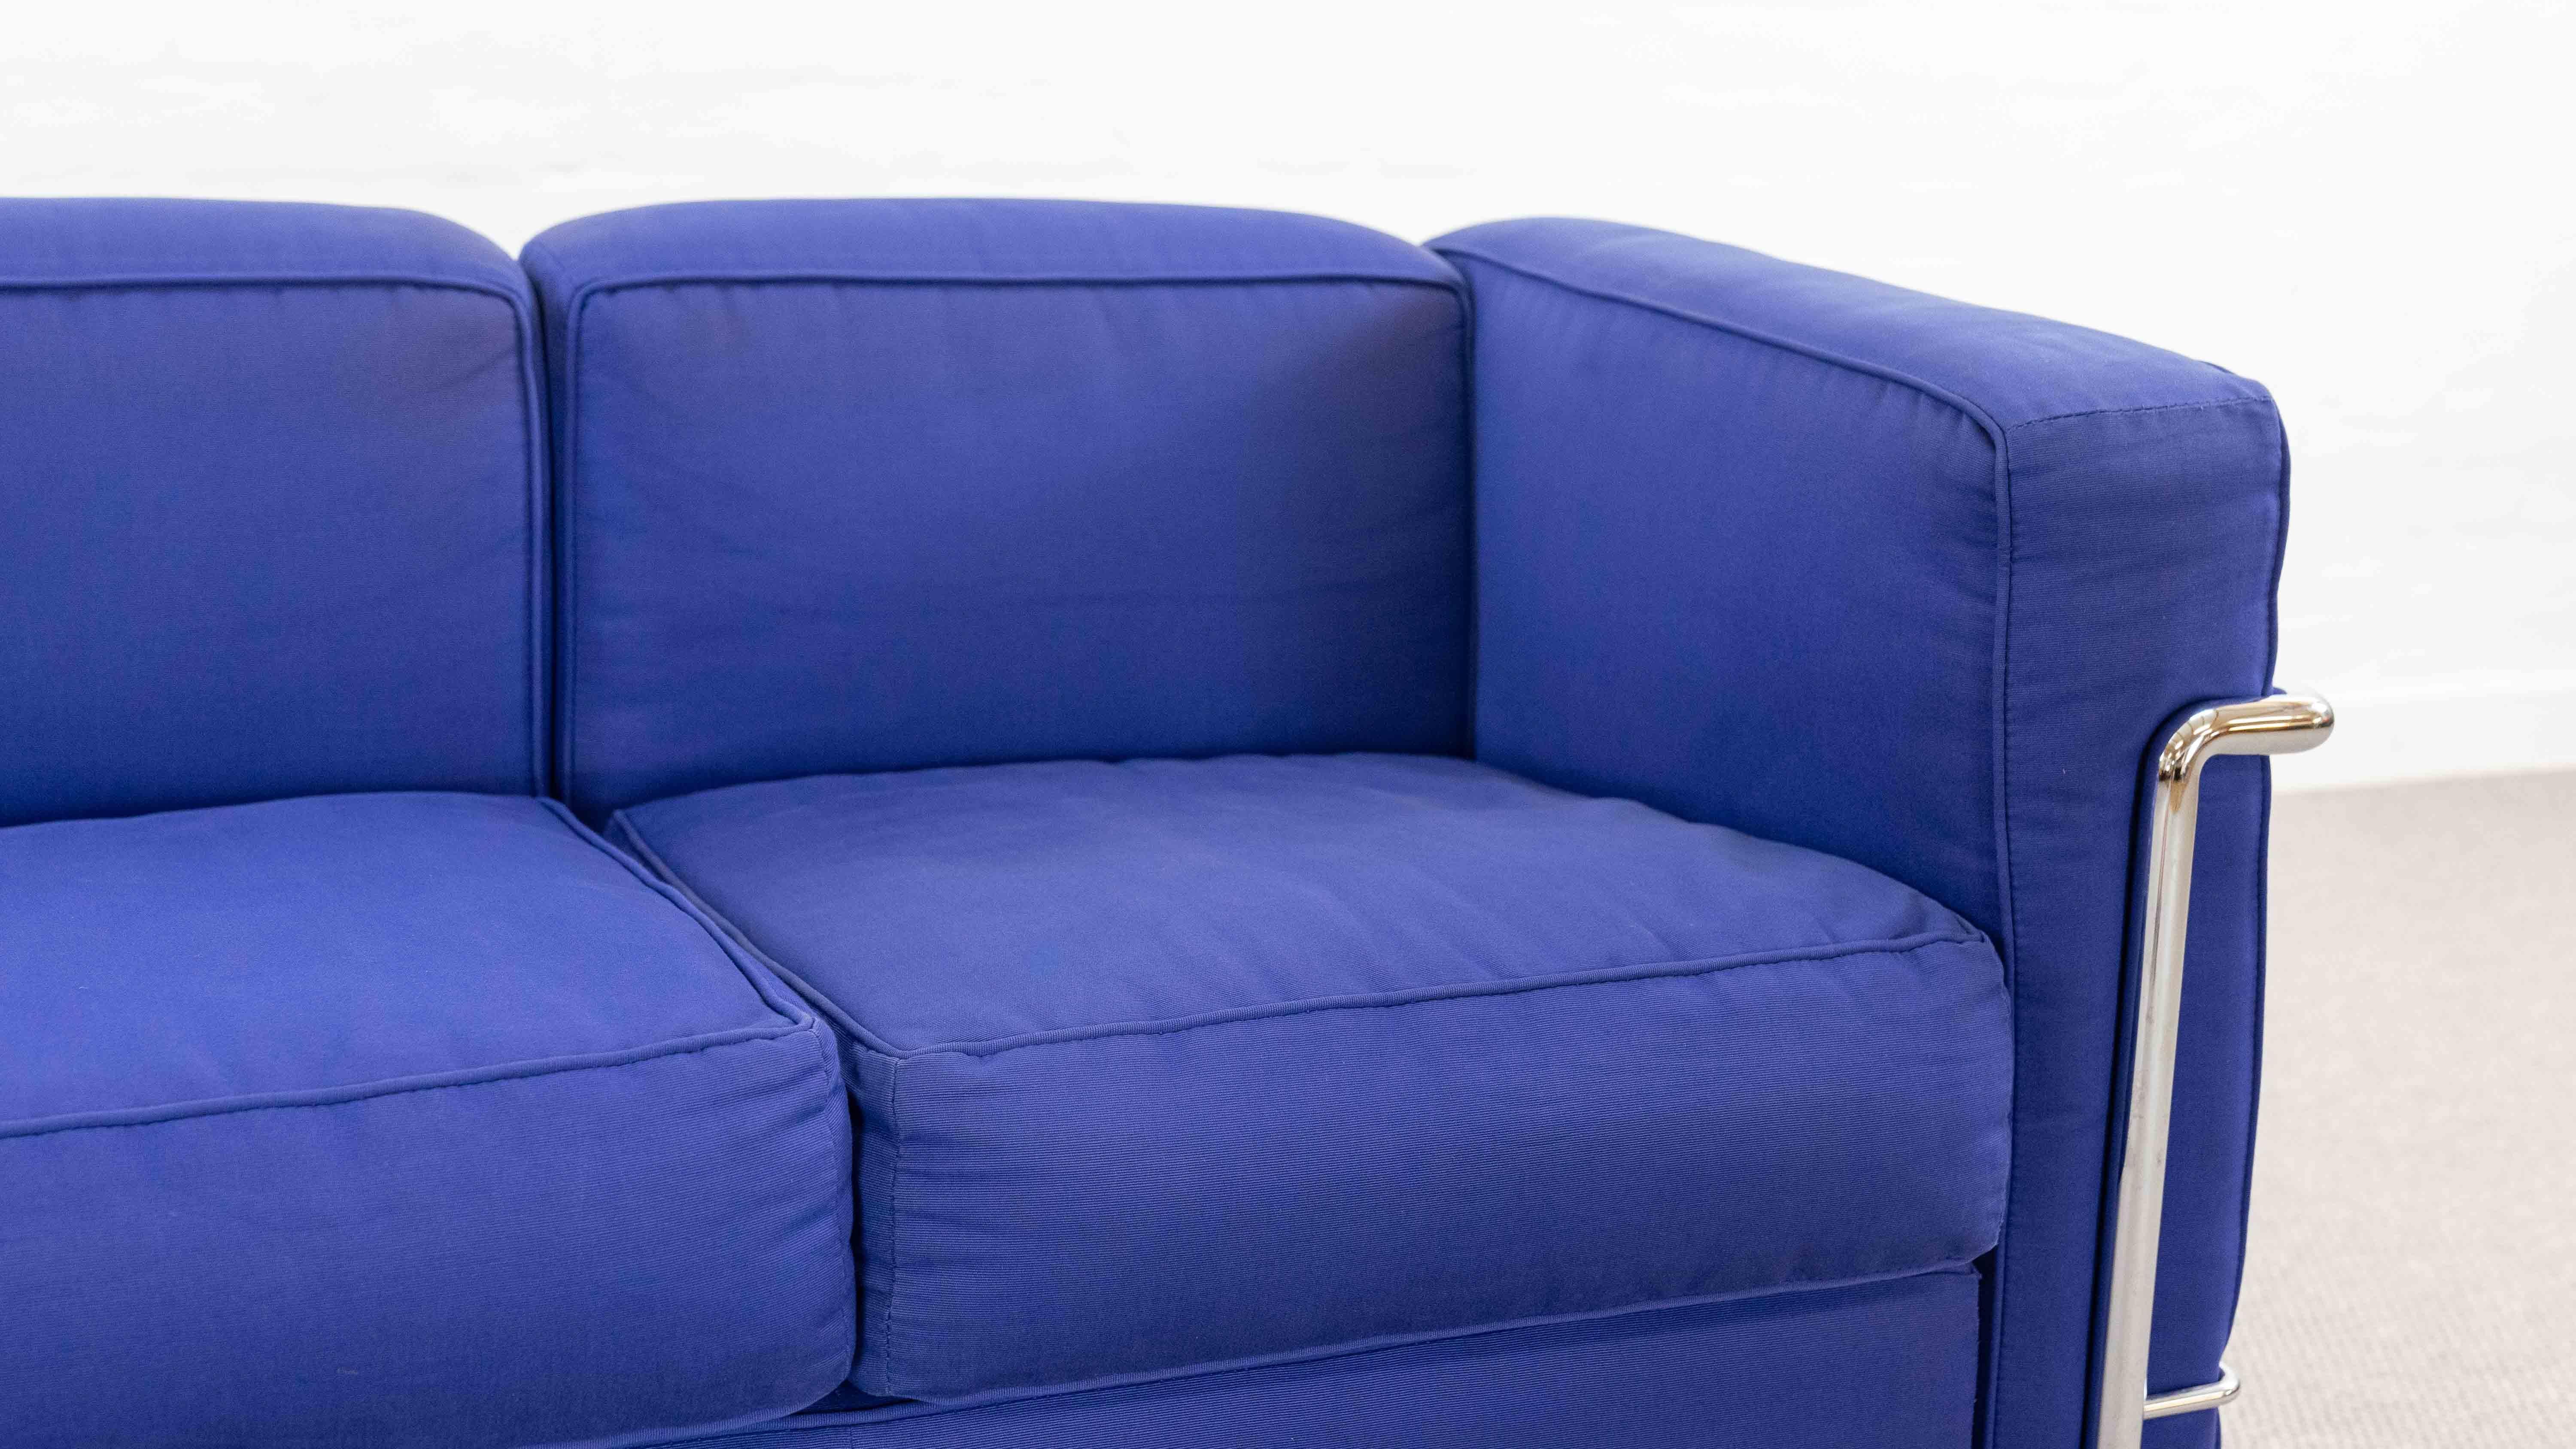 Cassina Lc2 3seat Sofa by Charlotte Perriand and Le Corbusier in Blue Fabrics 4